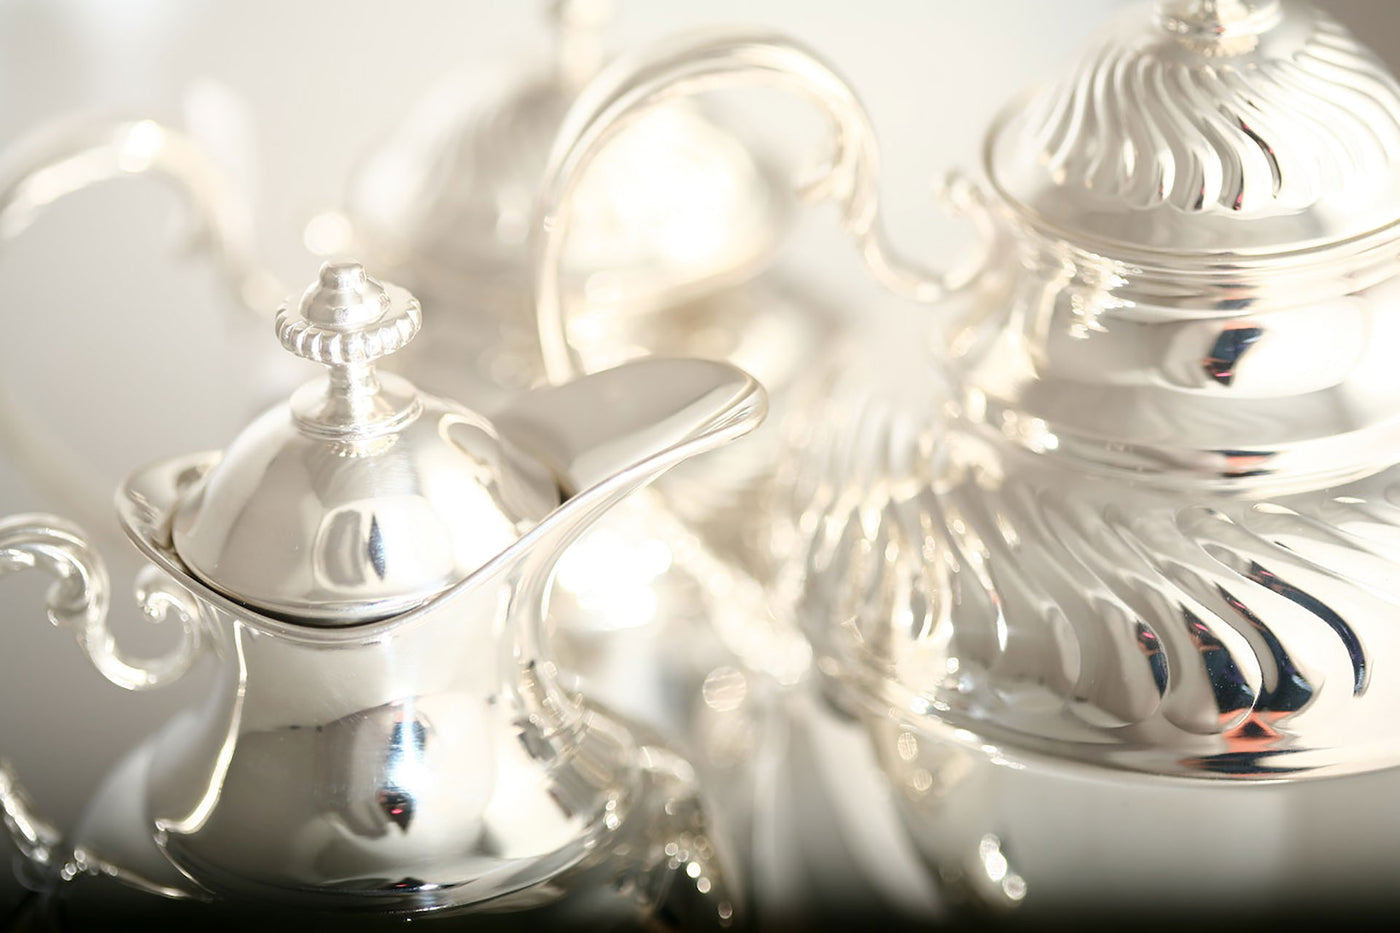 How to test the purity of your antique silver